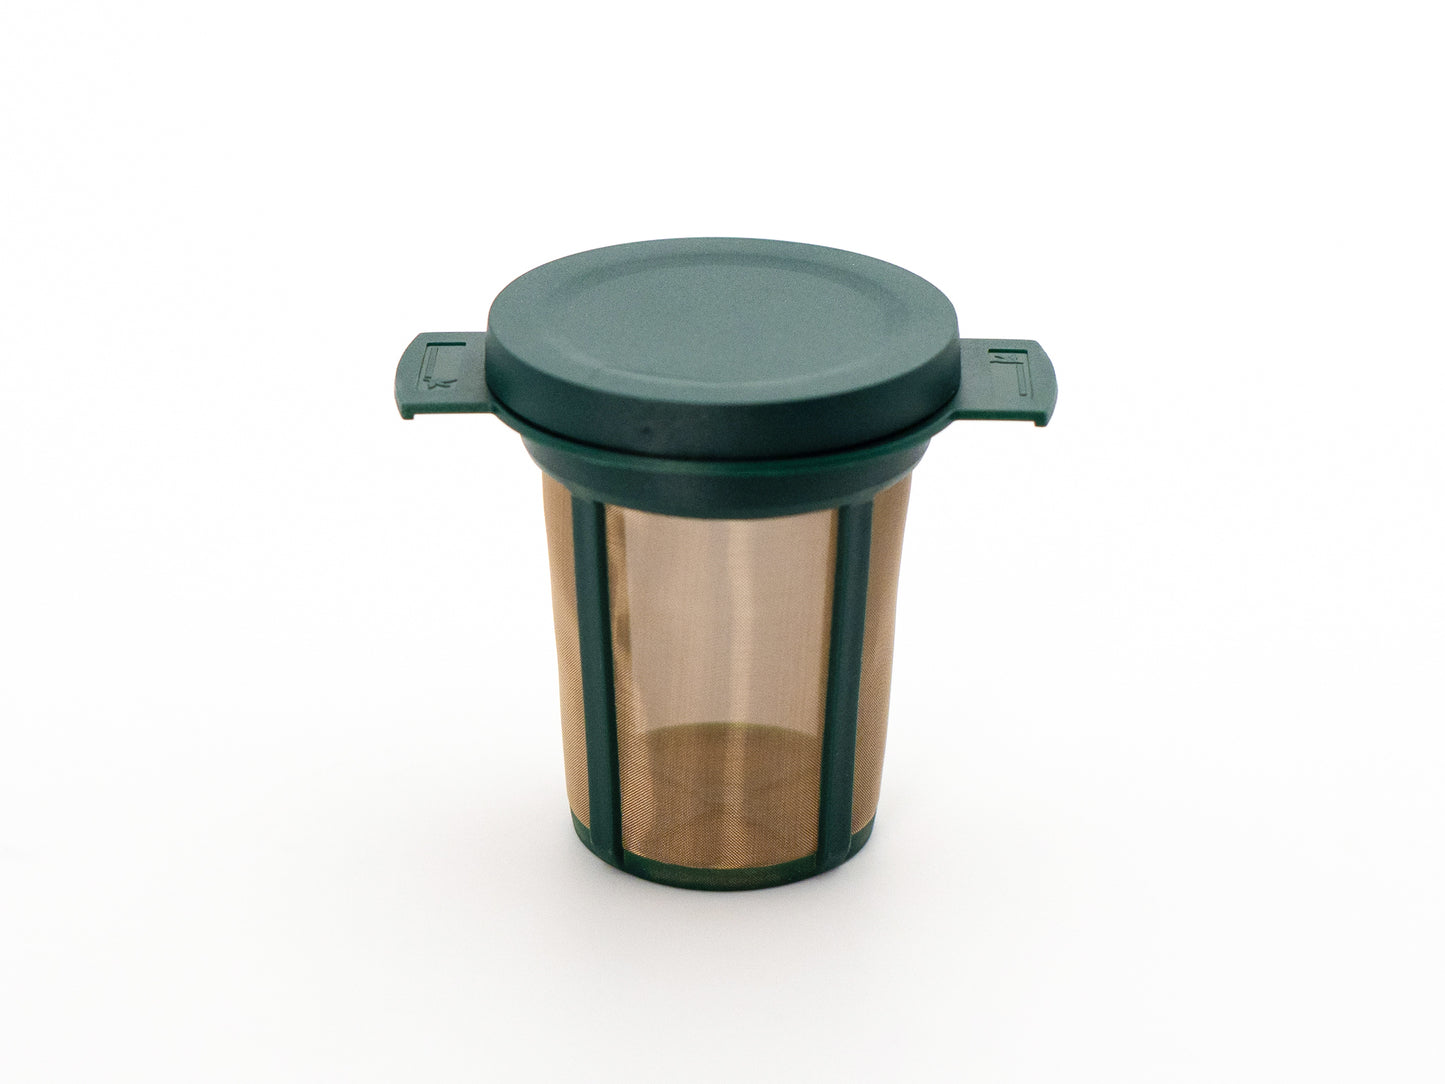 Permanent tea infuser basket with a lid on top